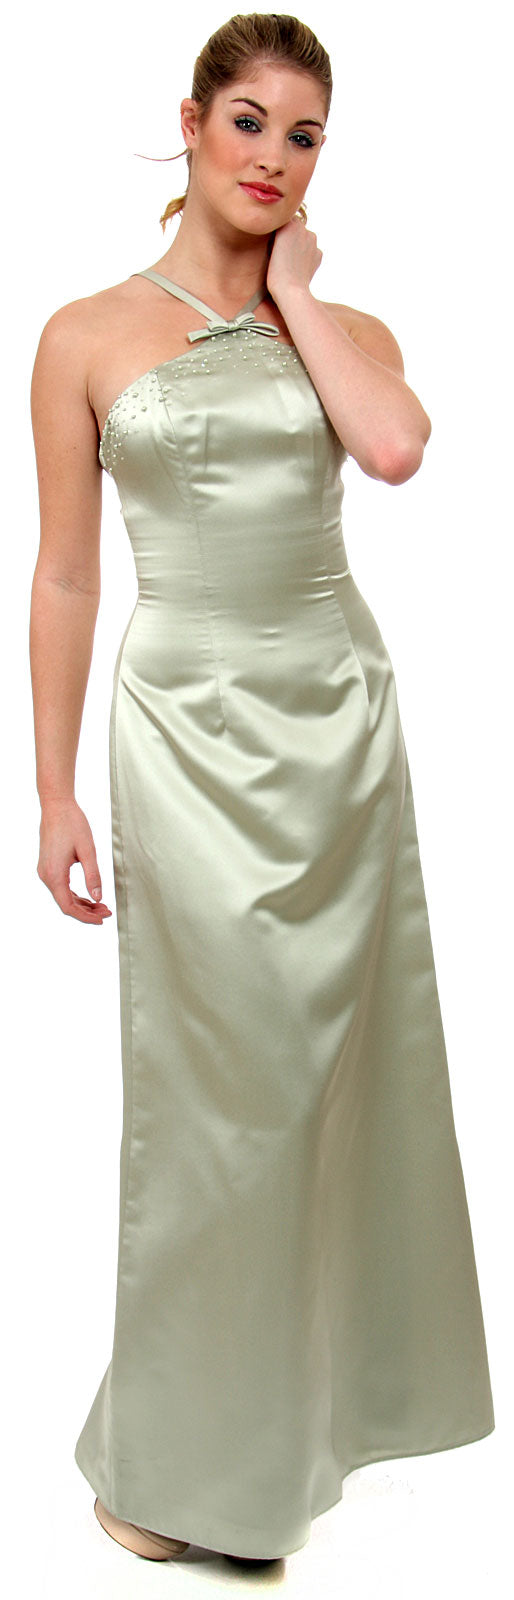 Main image of Crossed Front Beaded Evening Dress